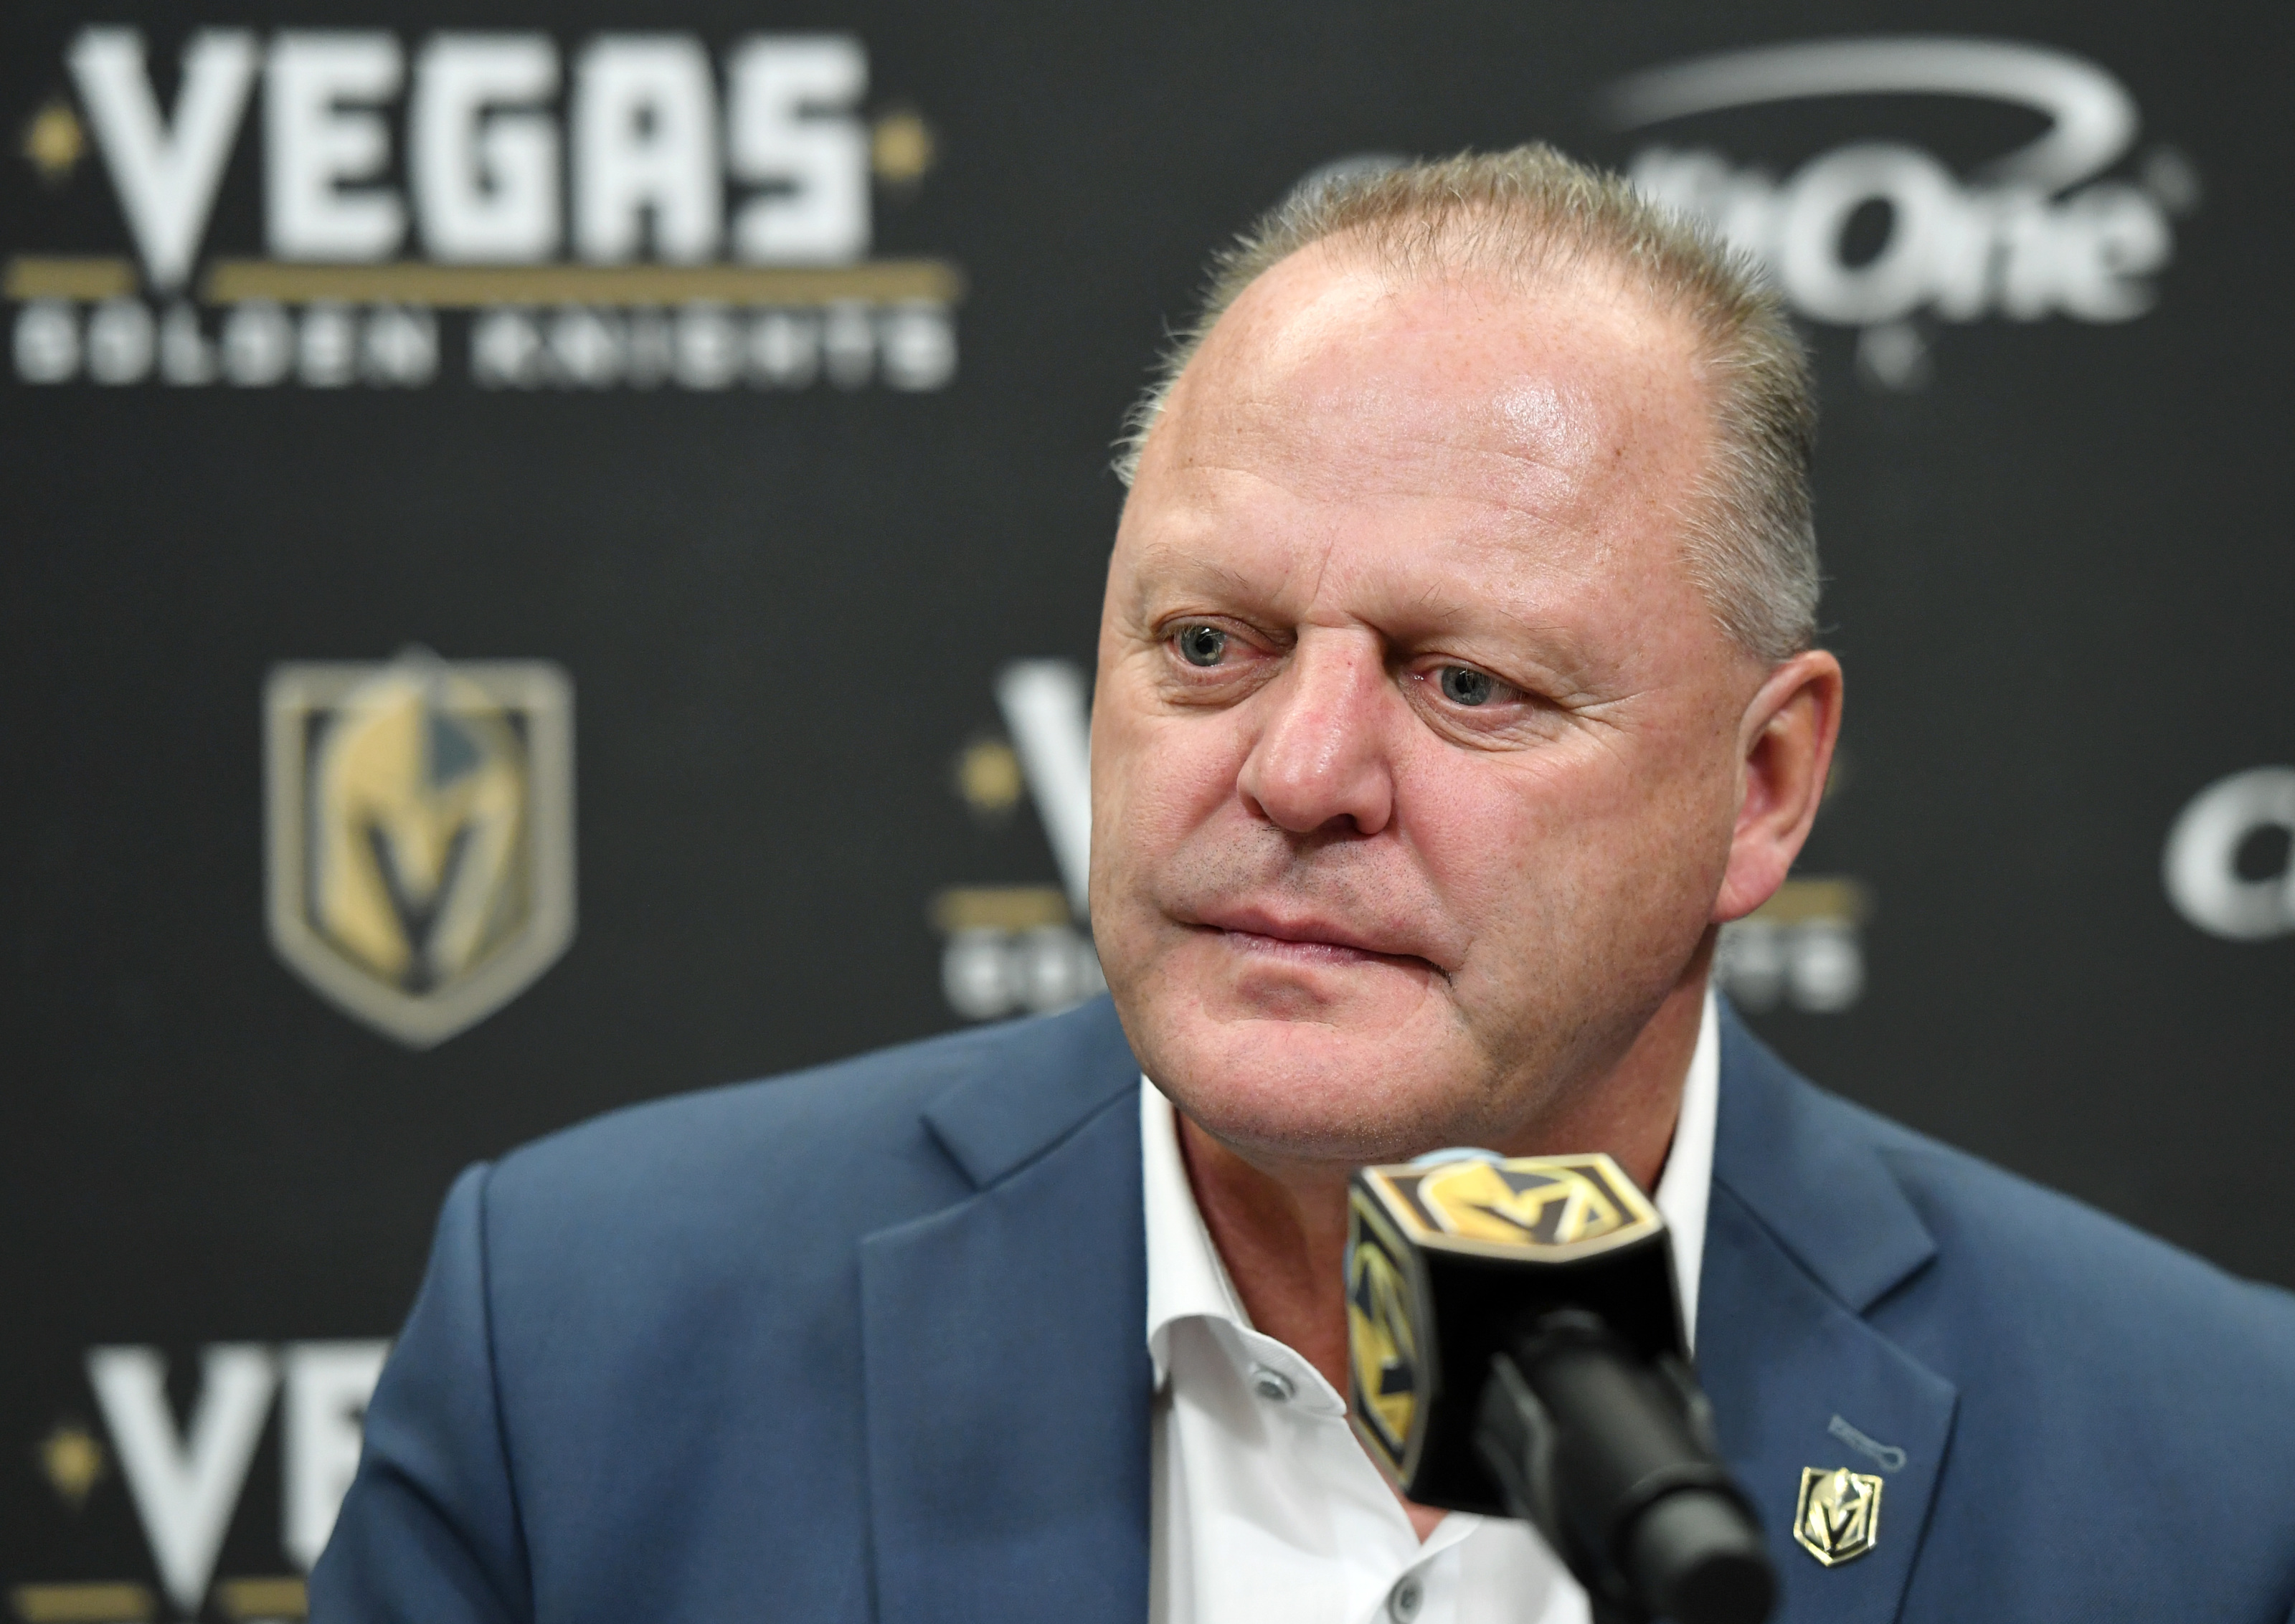 Vegas Golden Knights, N.H.L. Expansion Team, Hire Head Coach - The